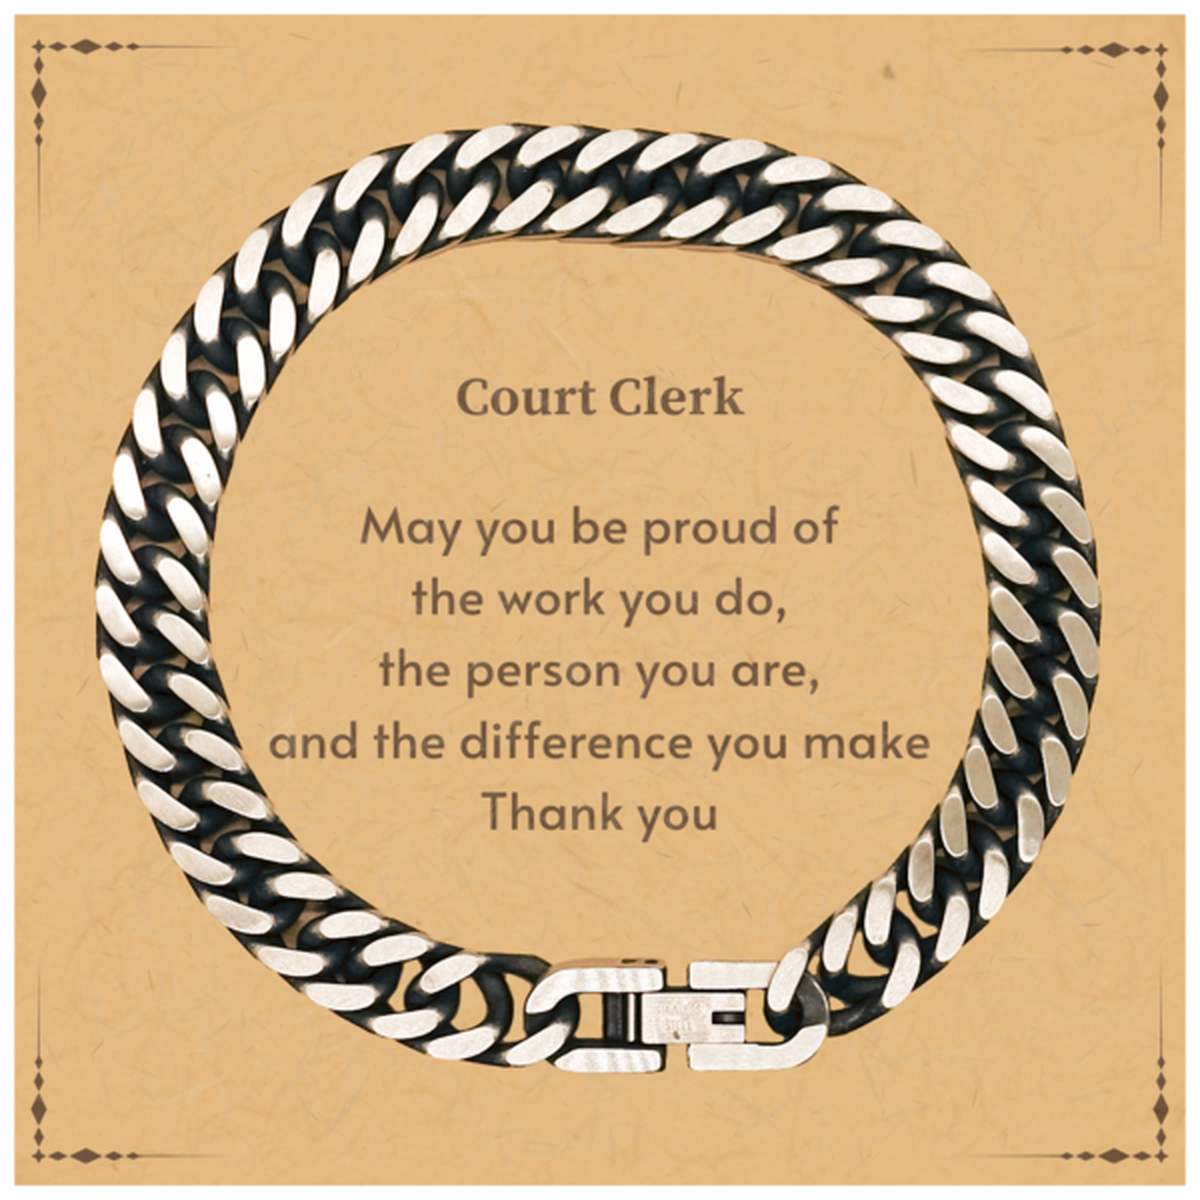 Heartwarming Cuban Link Chain Bracelet Retirement Coworkers Gifts for Court Clerk, Court Clerk May You be proud of the work you do, the person you are Gifts for Boss Men Women Friends